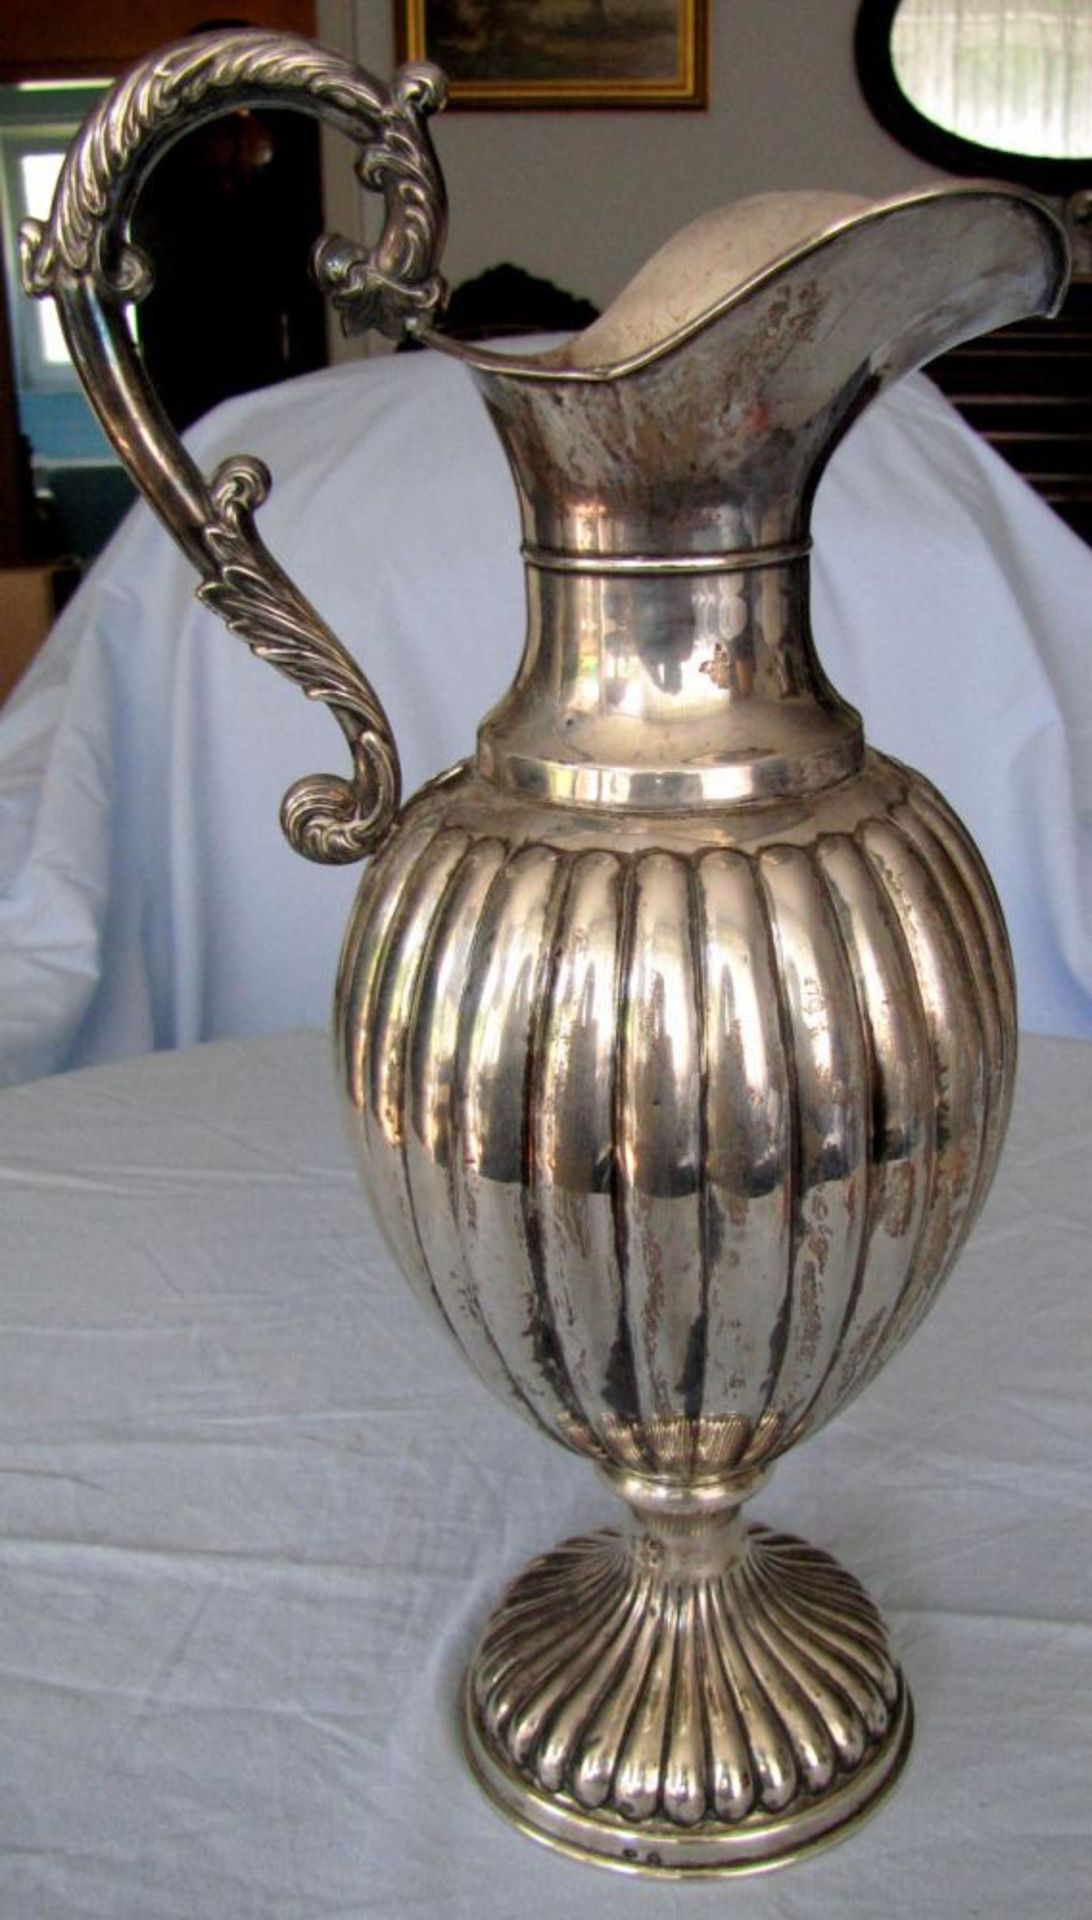 Carafe, Mid 19th century. Hallmarked.  34.5 cm high. 752 grams gross. In used condition.